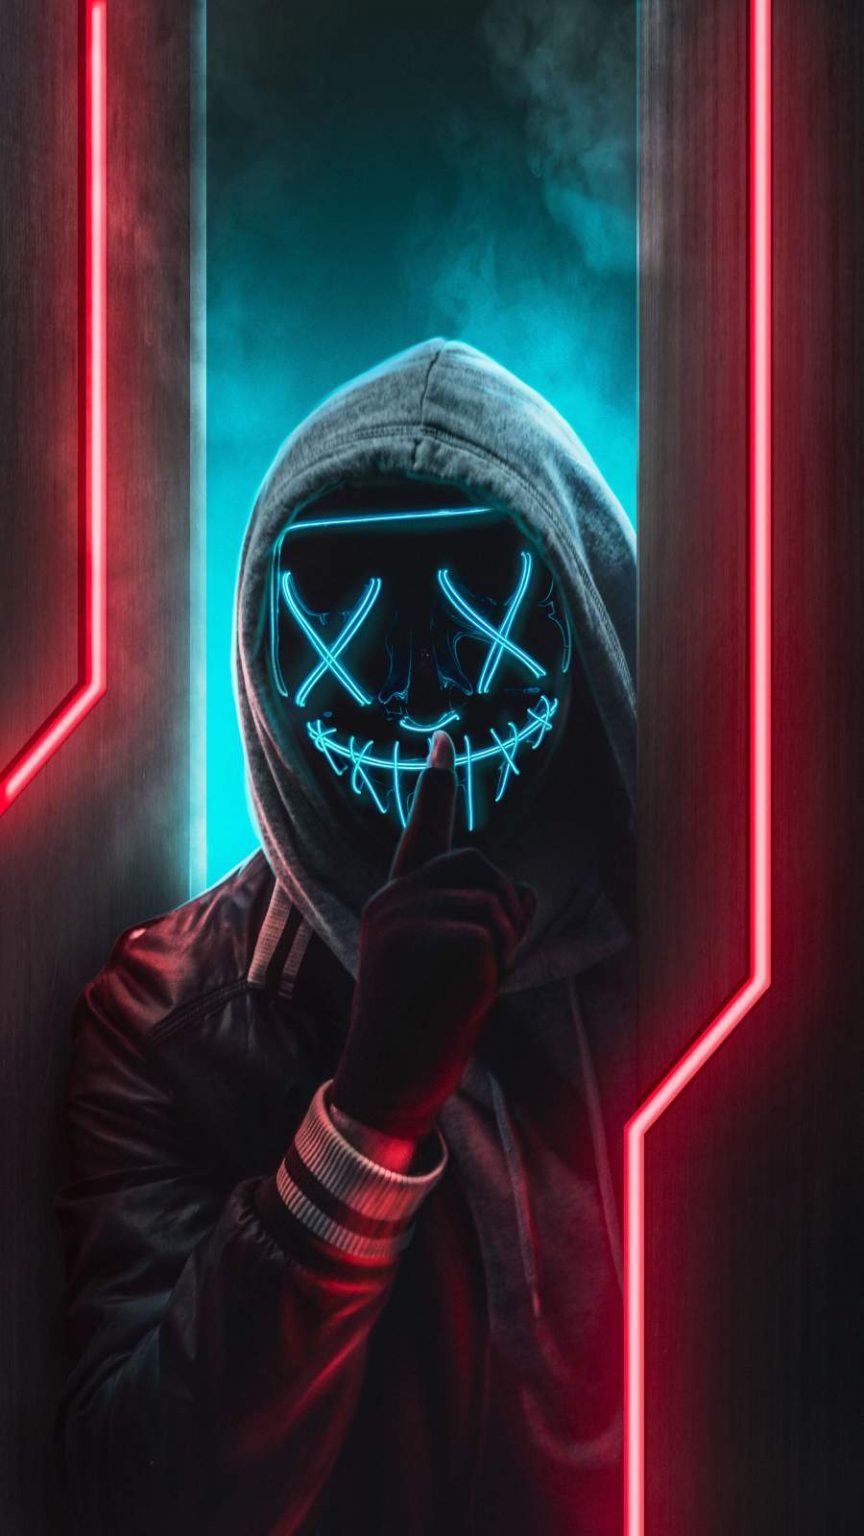 Anonymous Mask Hoodie Guy iPhone Wallpaper - iPhone Wallpapers